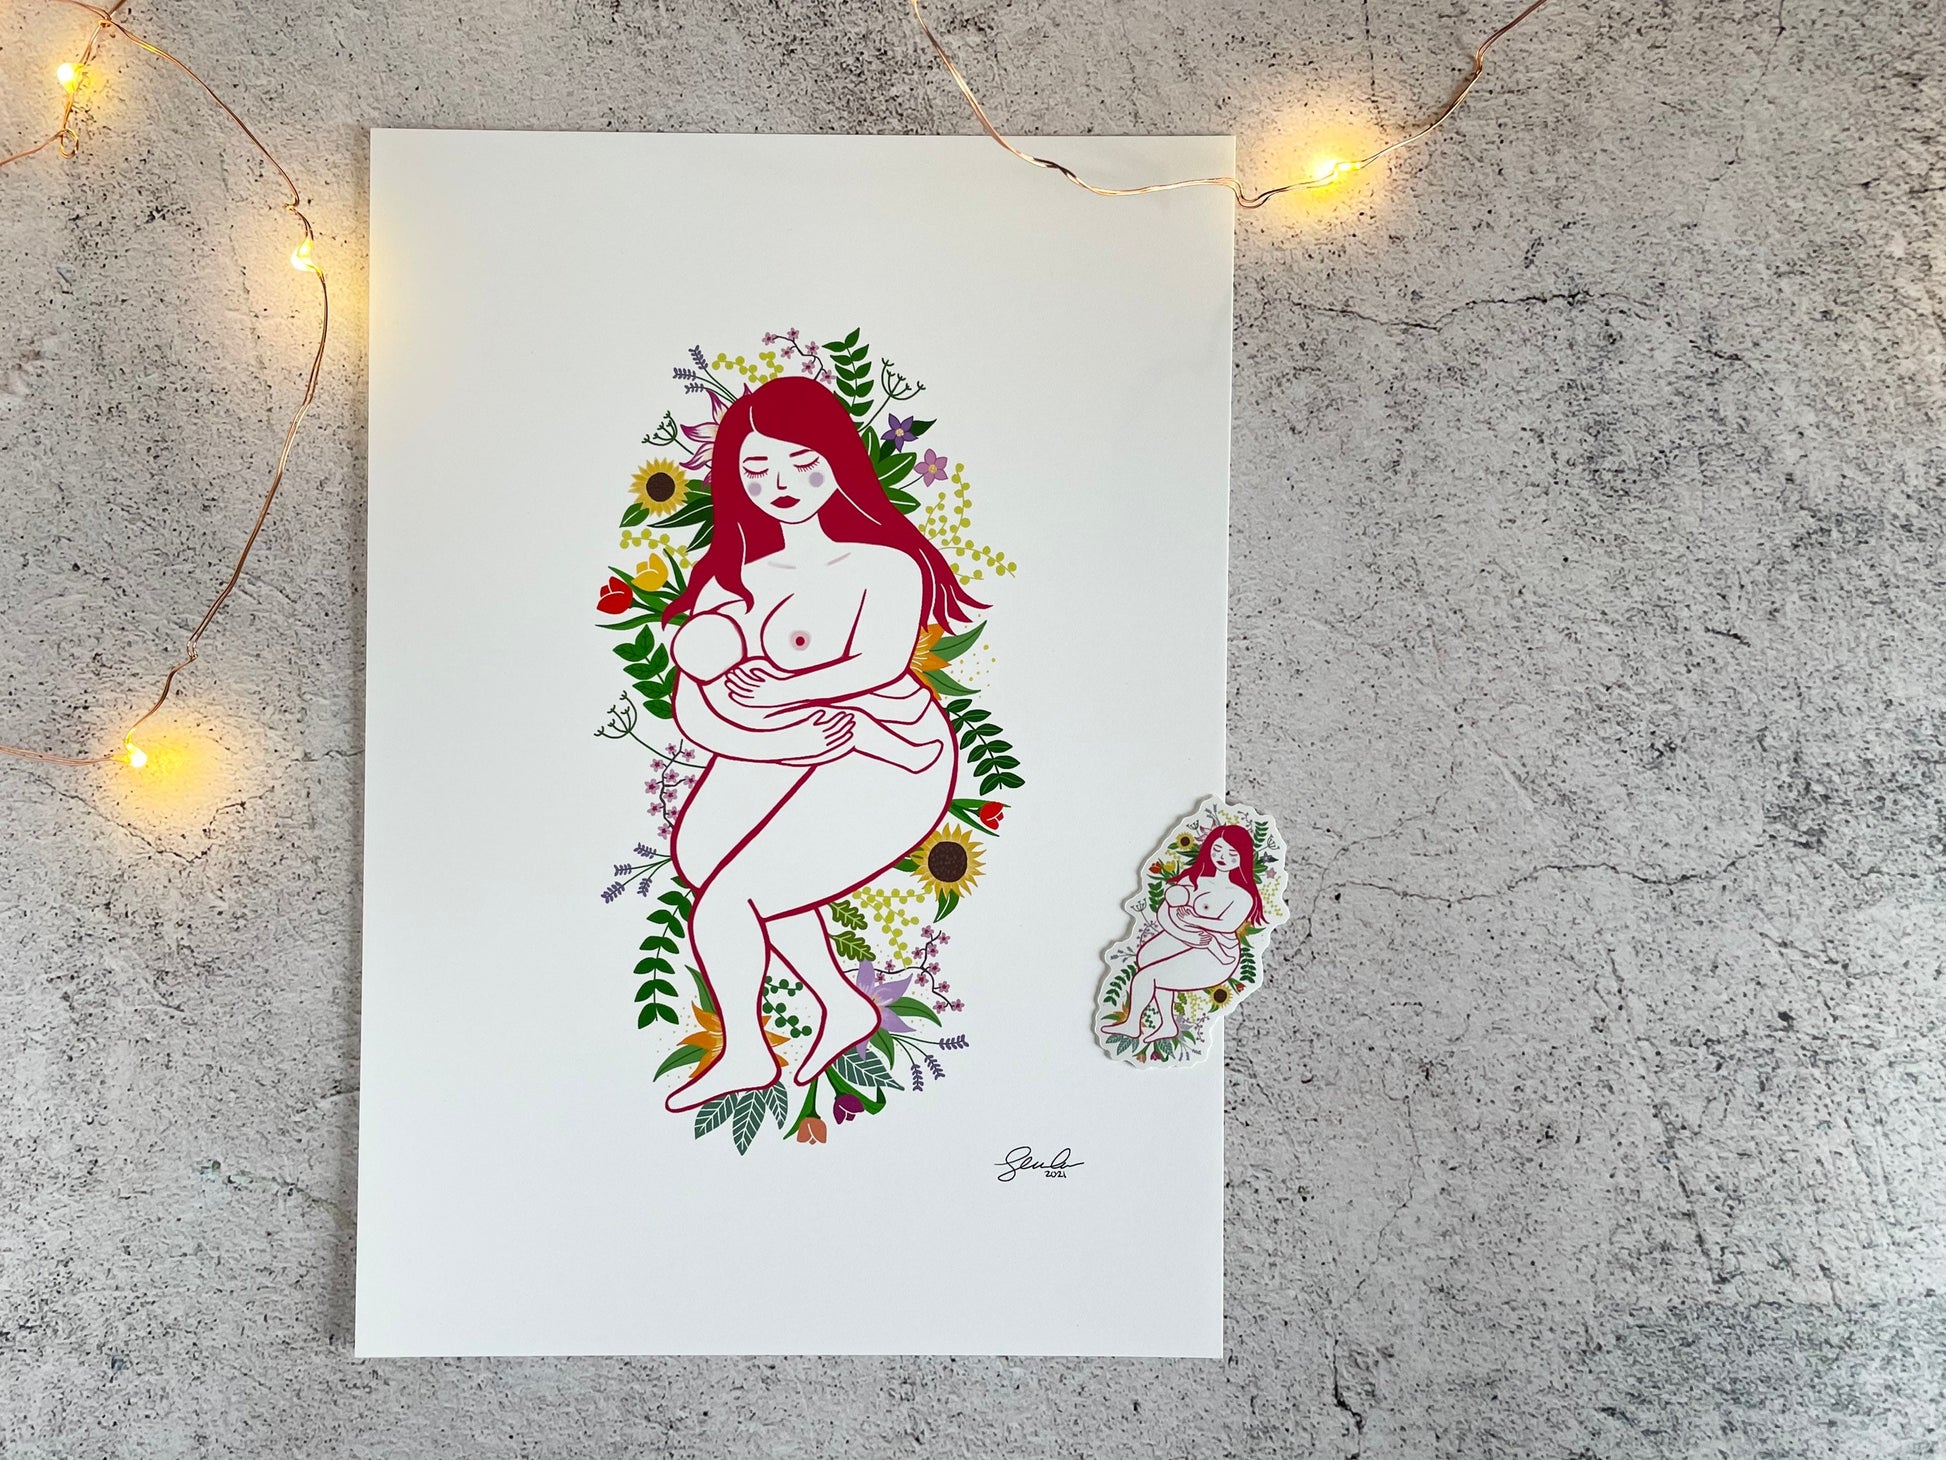 A print and sticker of digital art of a naked mother breastfeeding her baby while laying on a bed of flowers and leaves